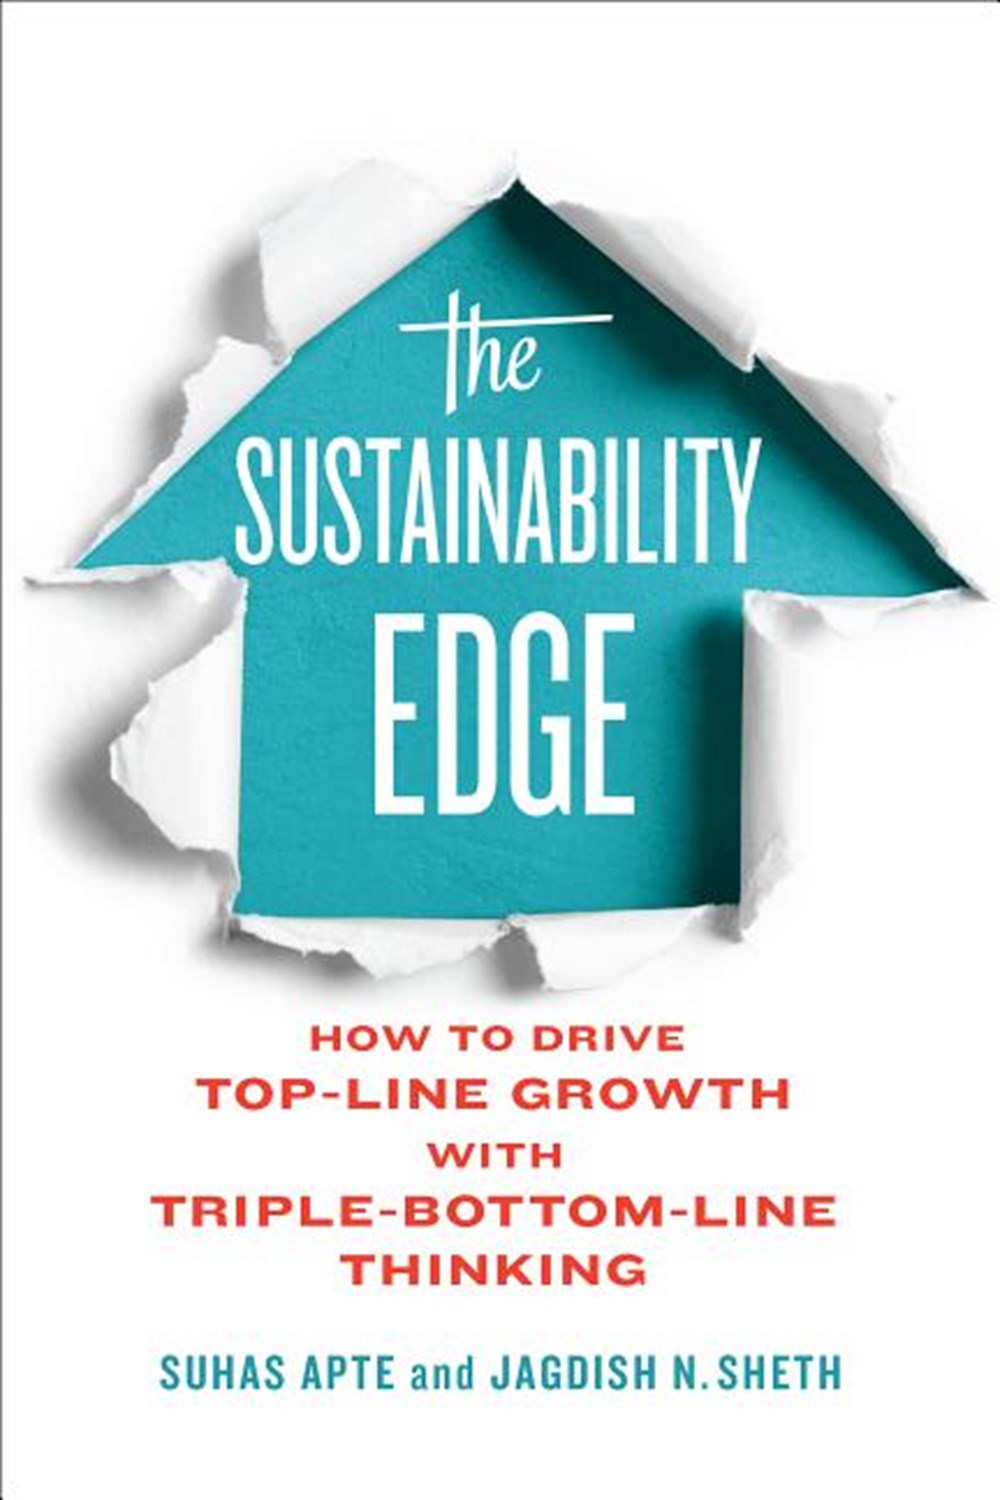 Sustainability Edge: How to Drive Top-Line Growth with Triple-Bottom-Line Thinking